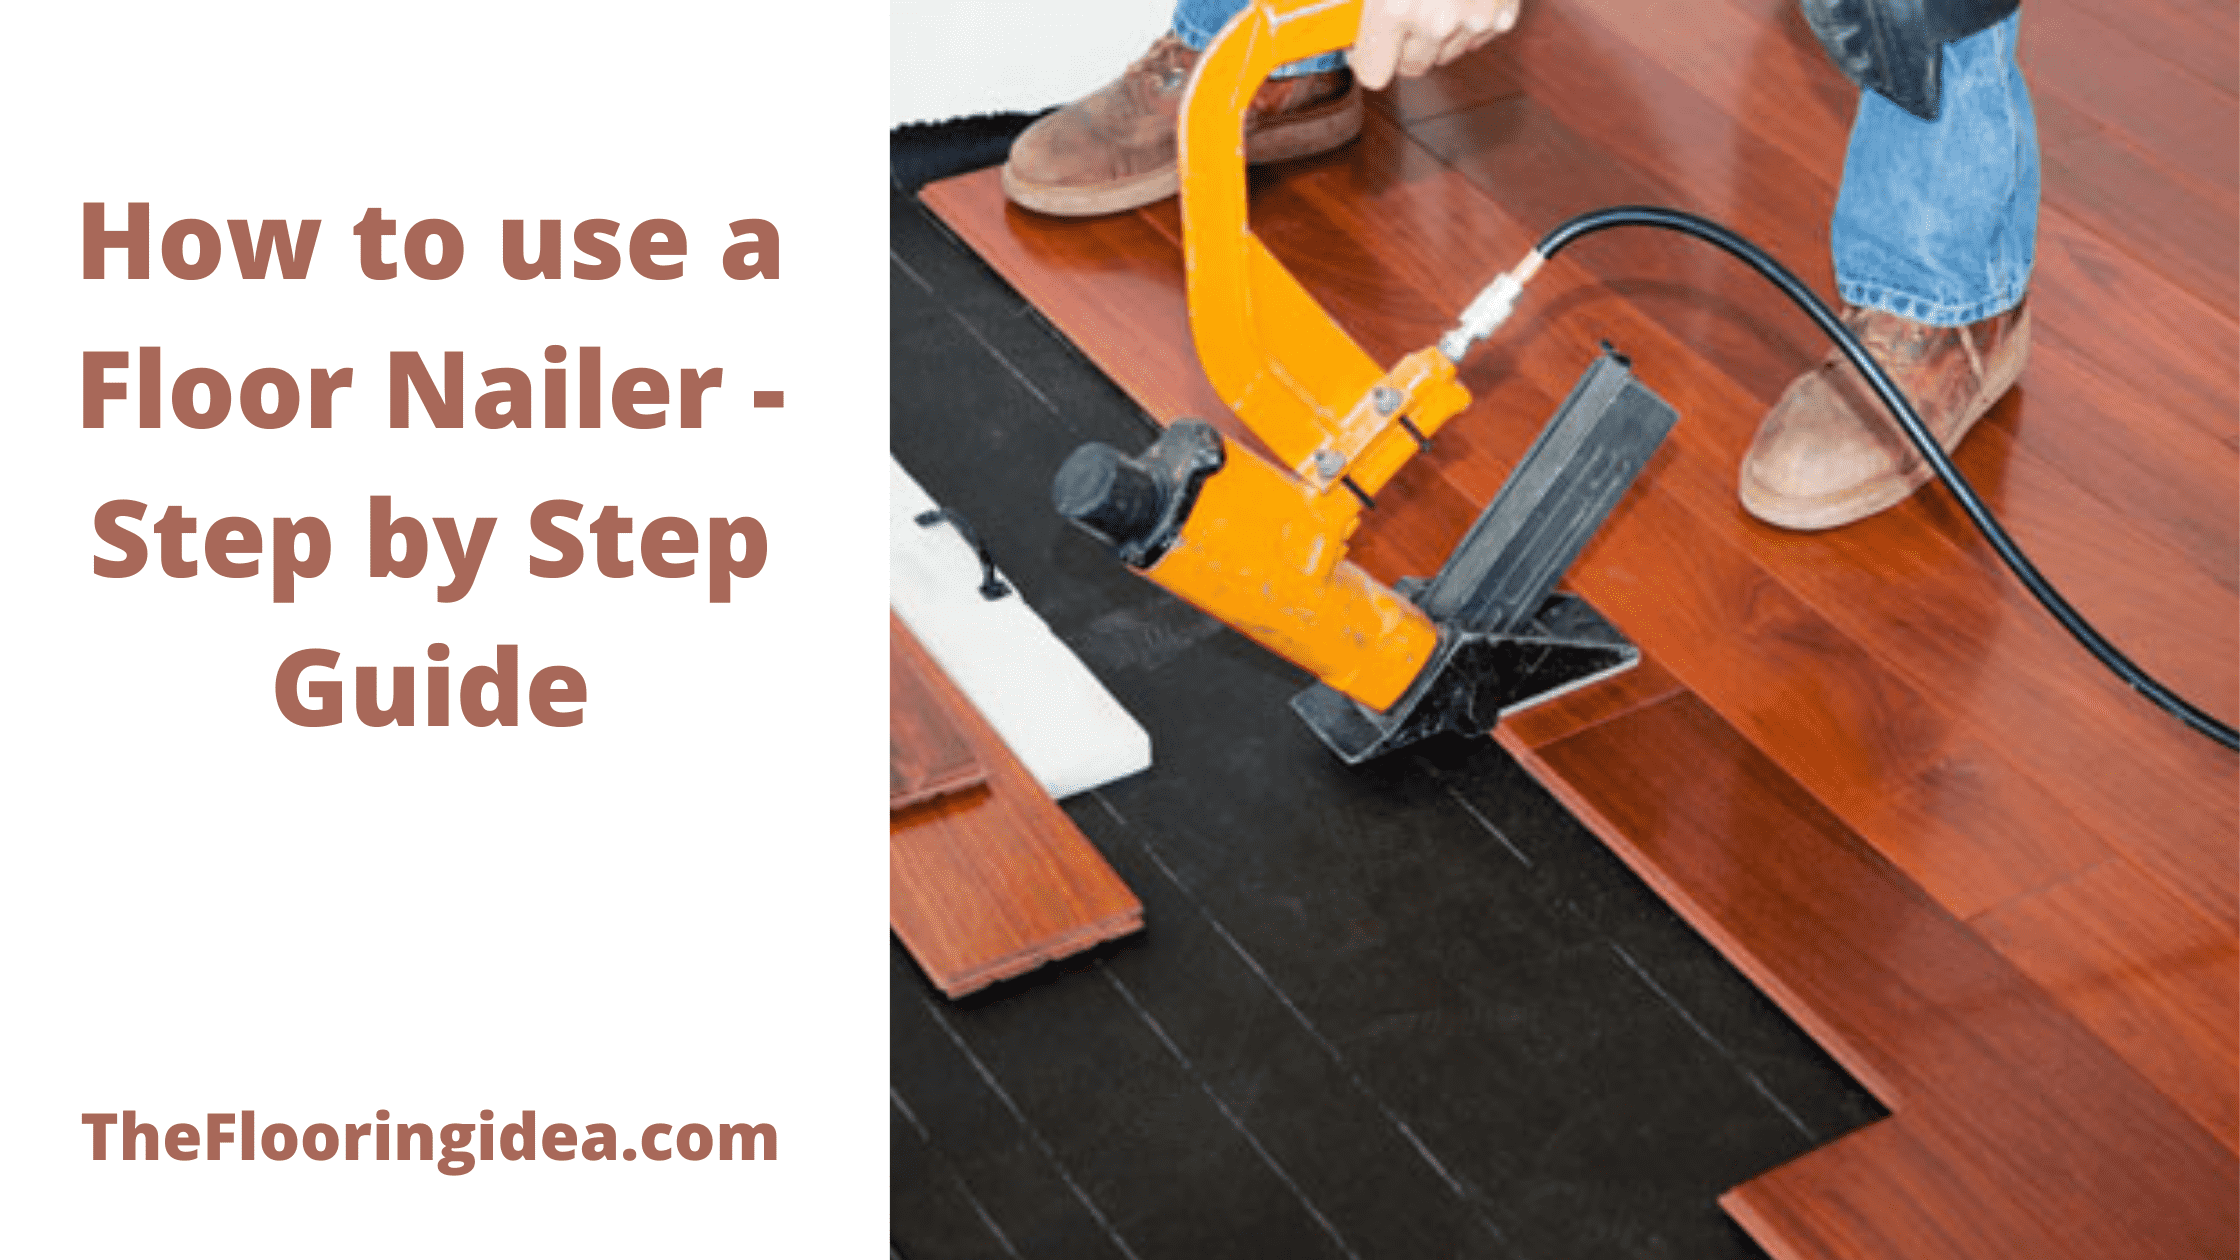 How To Use A Floor Nailer In 7 Easy Steps, Angle Nailer Hardwood Floor